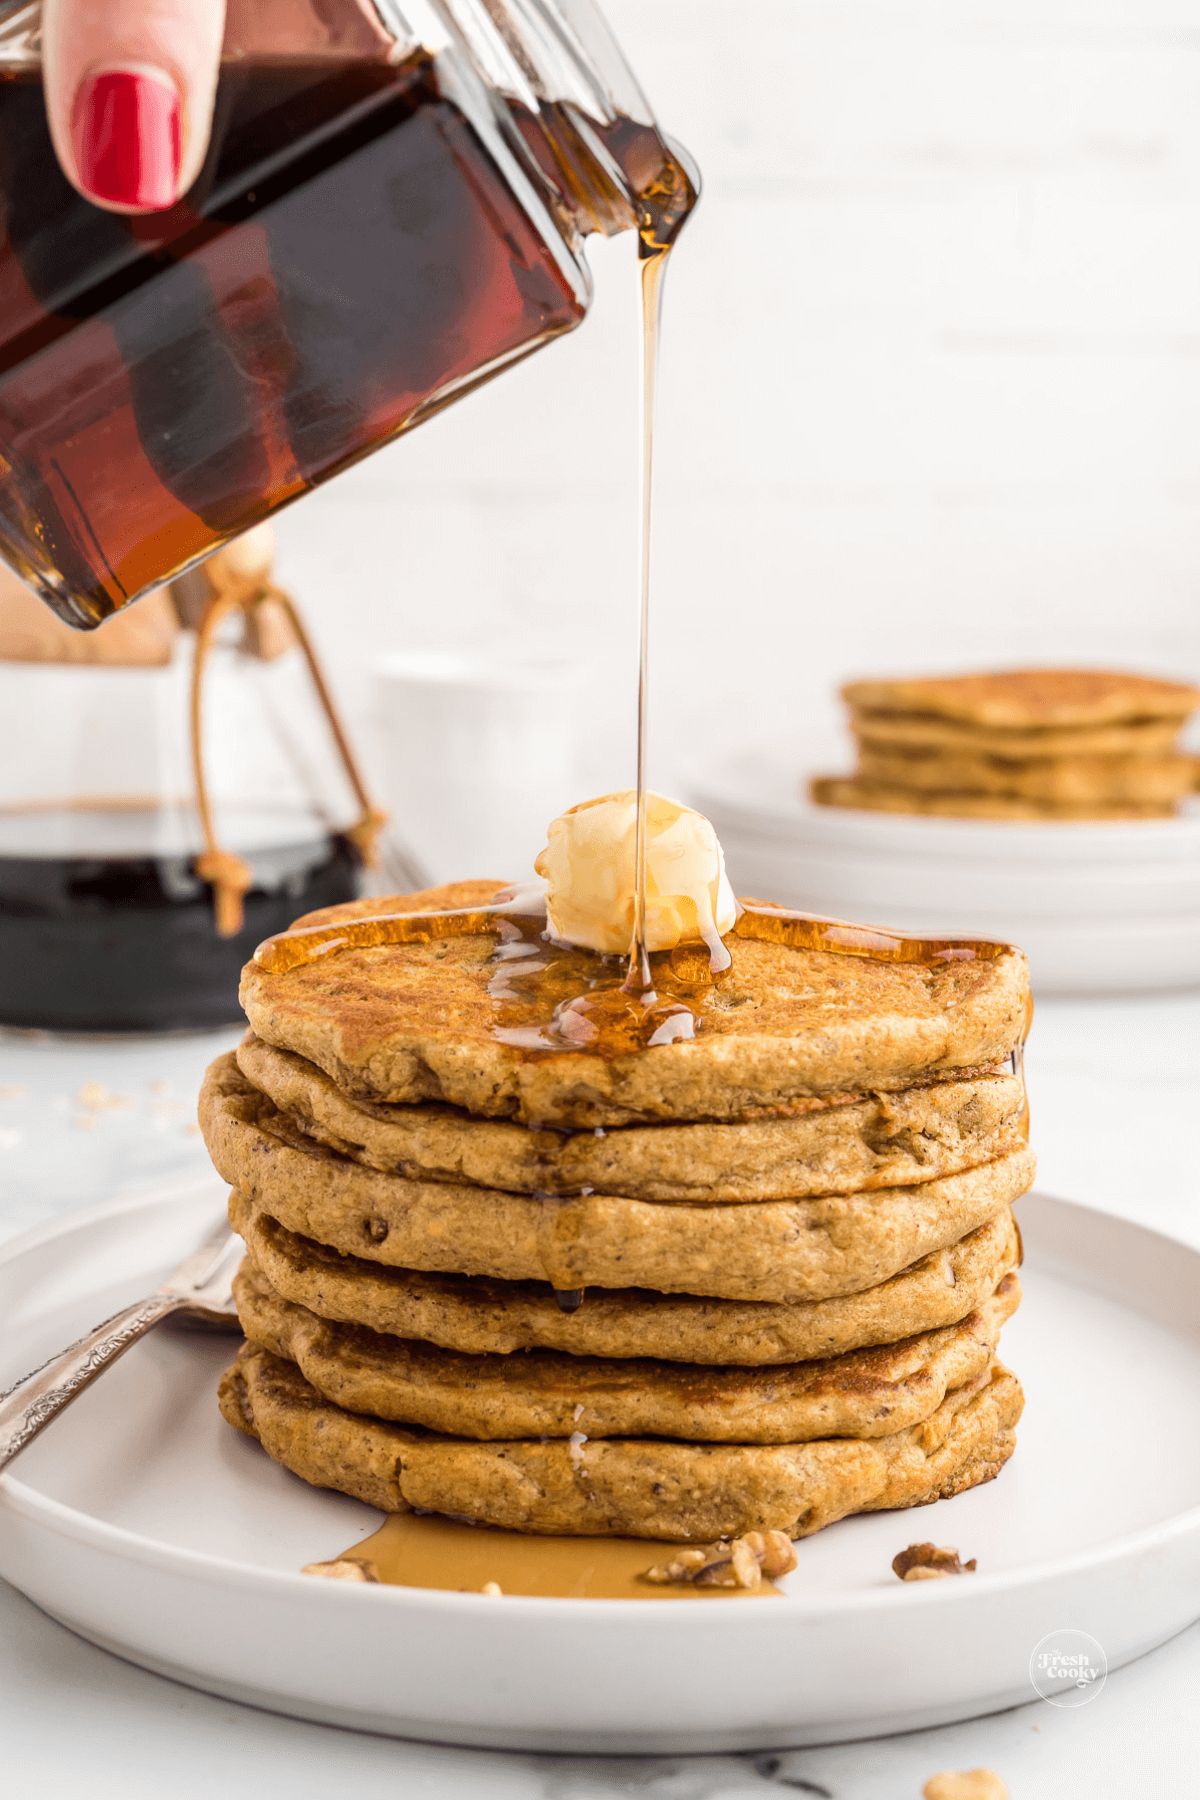 Harvest grain n nut pancakes stack on plate with butter and person pouring maple syrup.